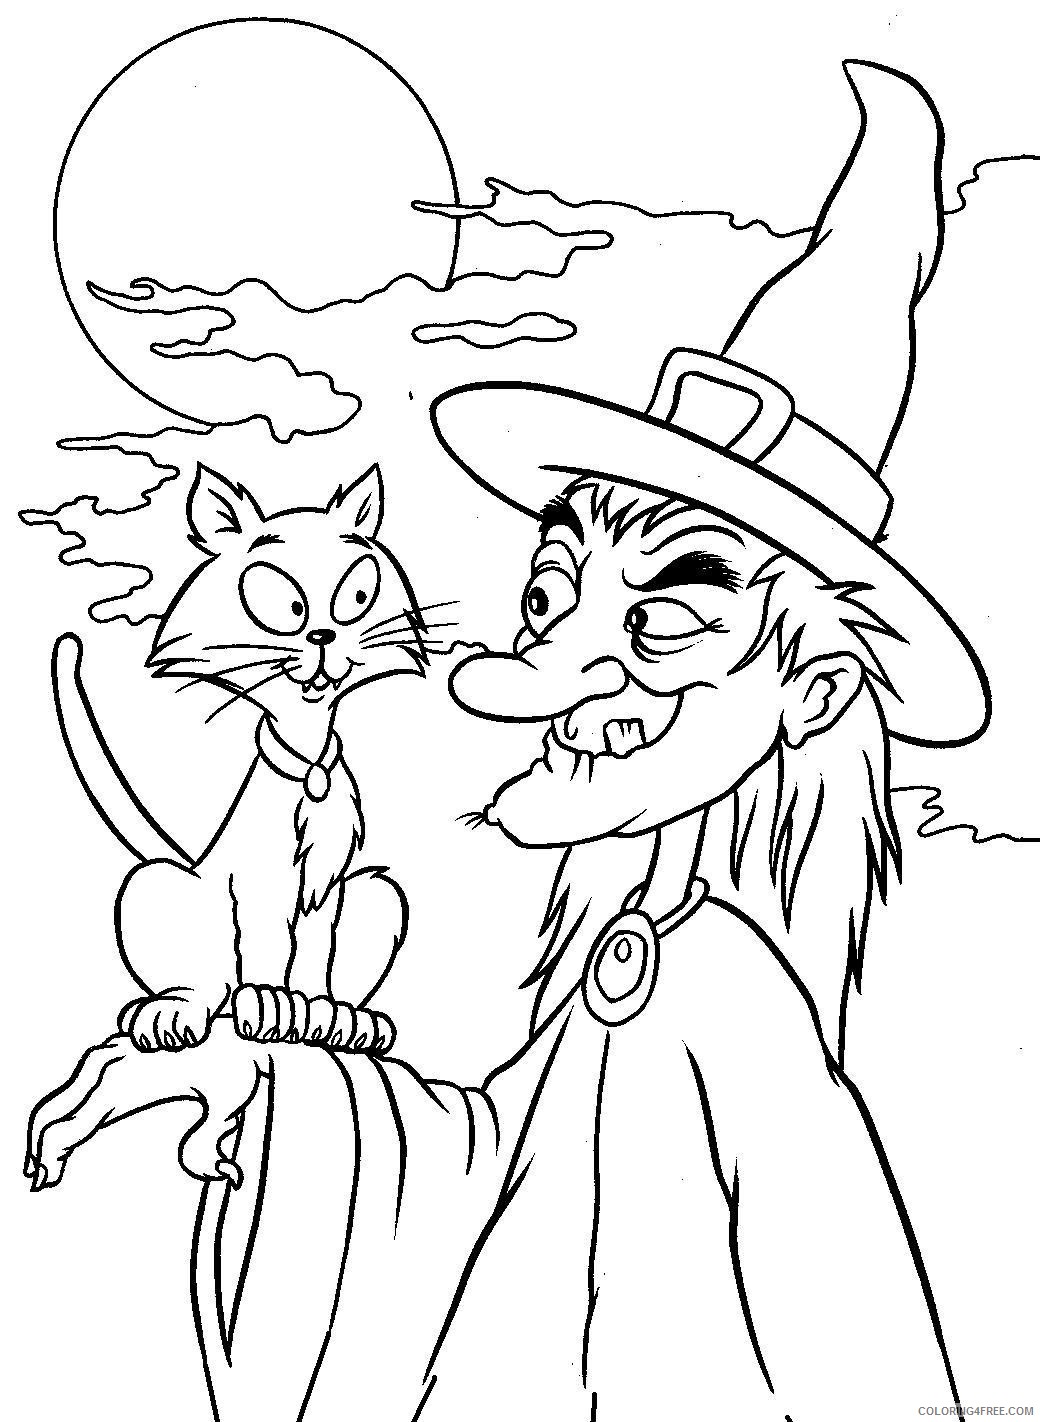 witch coloring pages with her cat Coloring4free